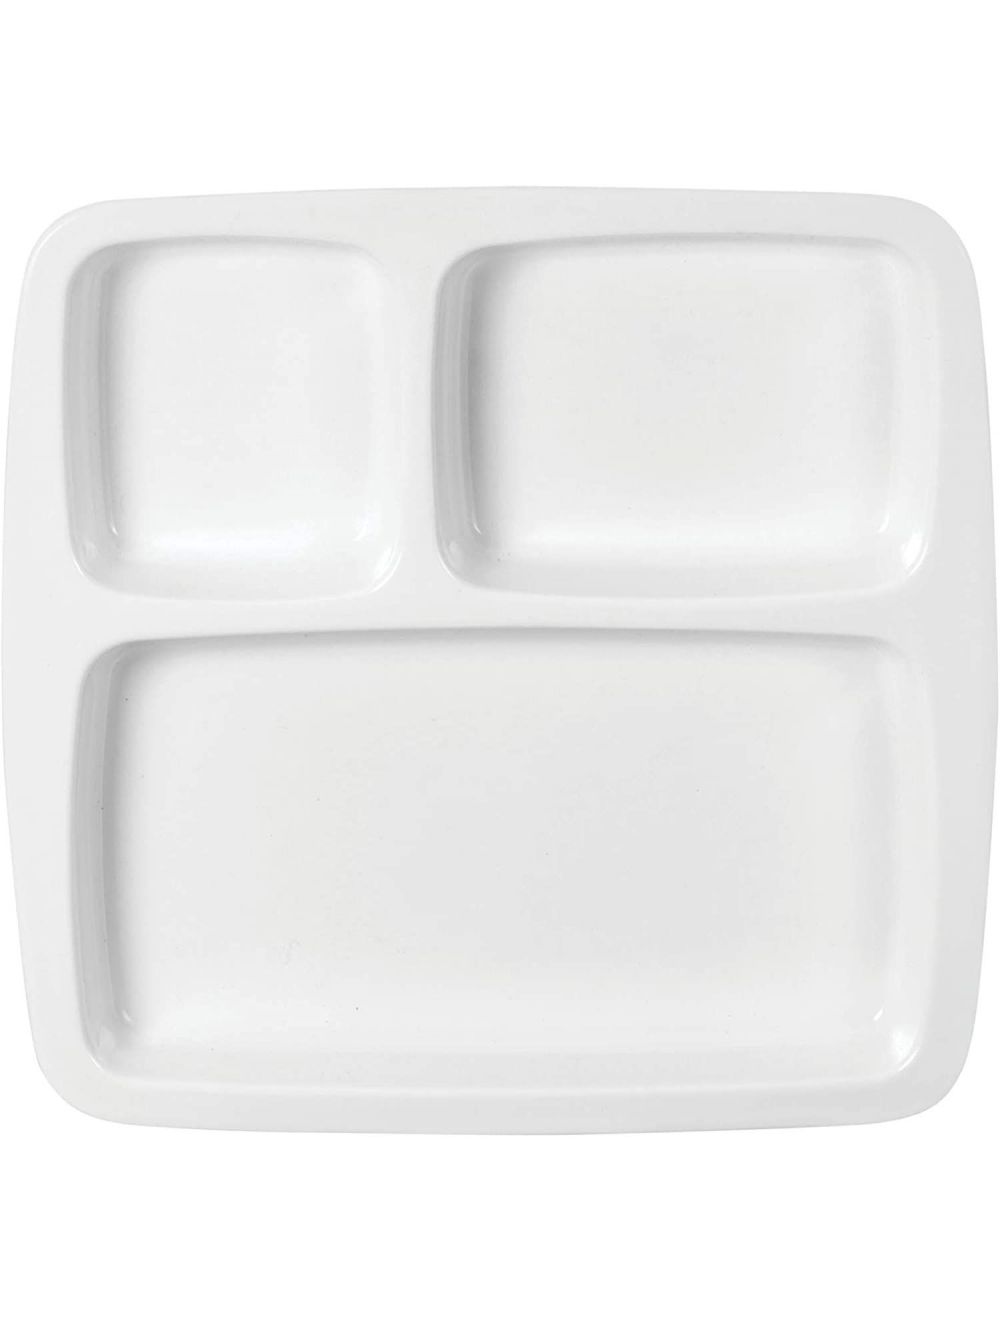 Dinewell Melamine 3 Partition Tray White-DWHP3073W